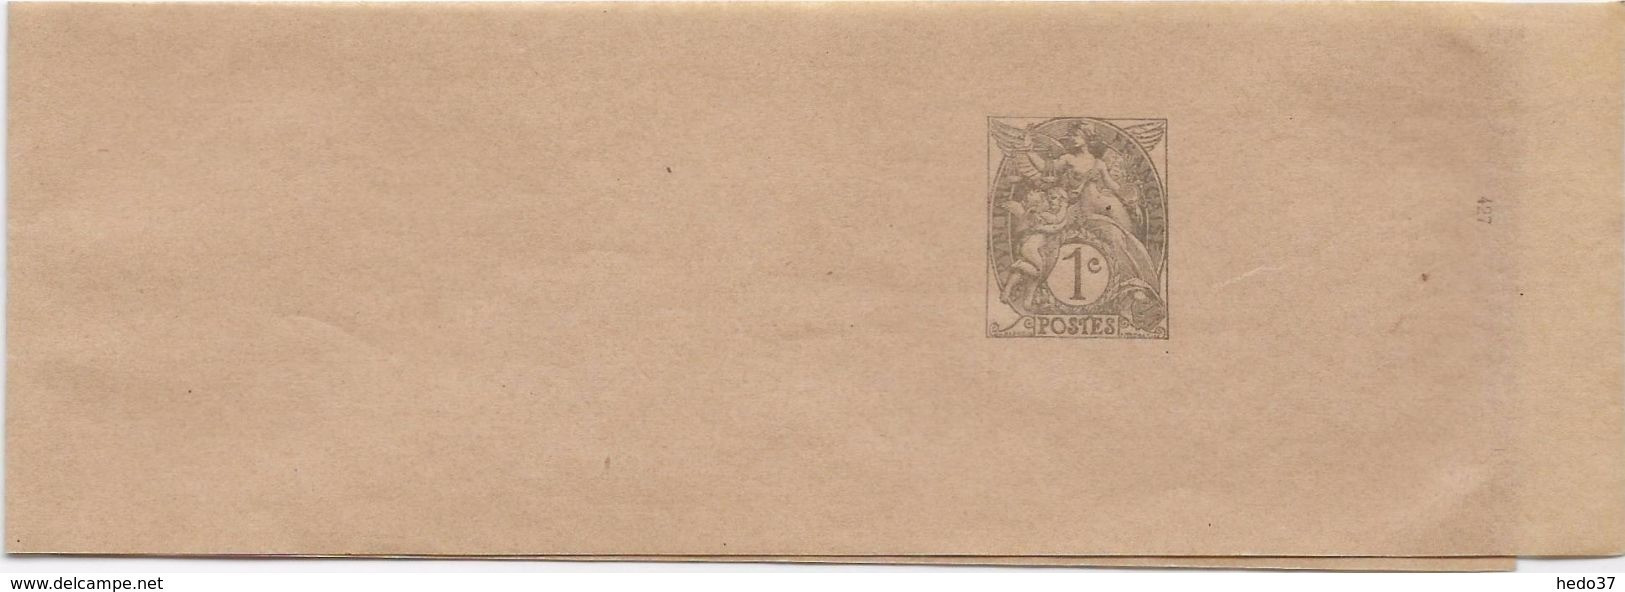 France Entiers Postaux - Type Blanc 1 C Gris  - Bande-journal - TB - Newspaper Bands